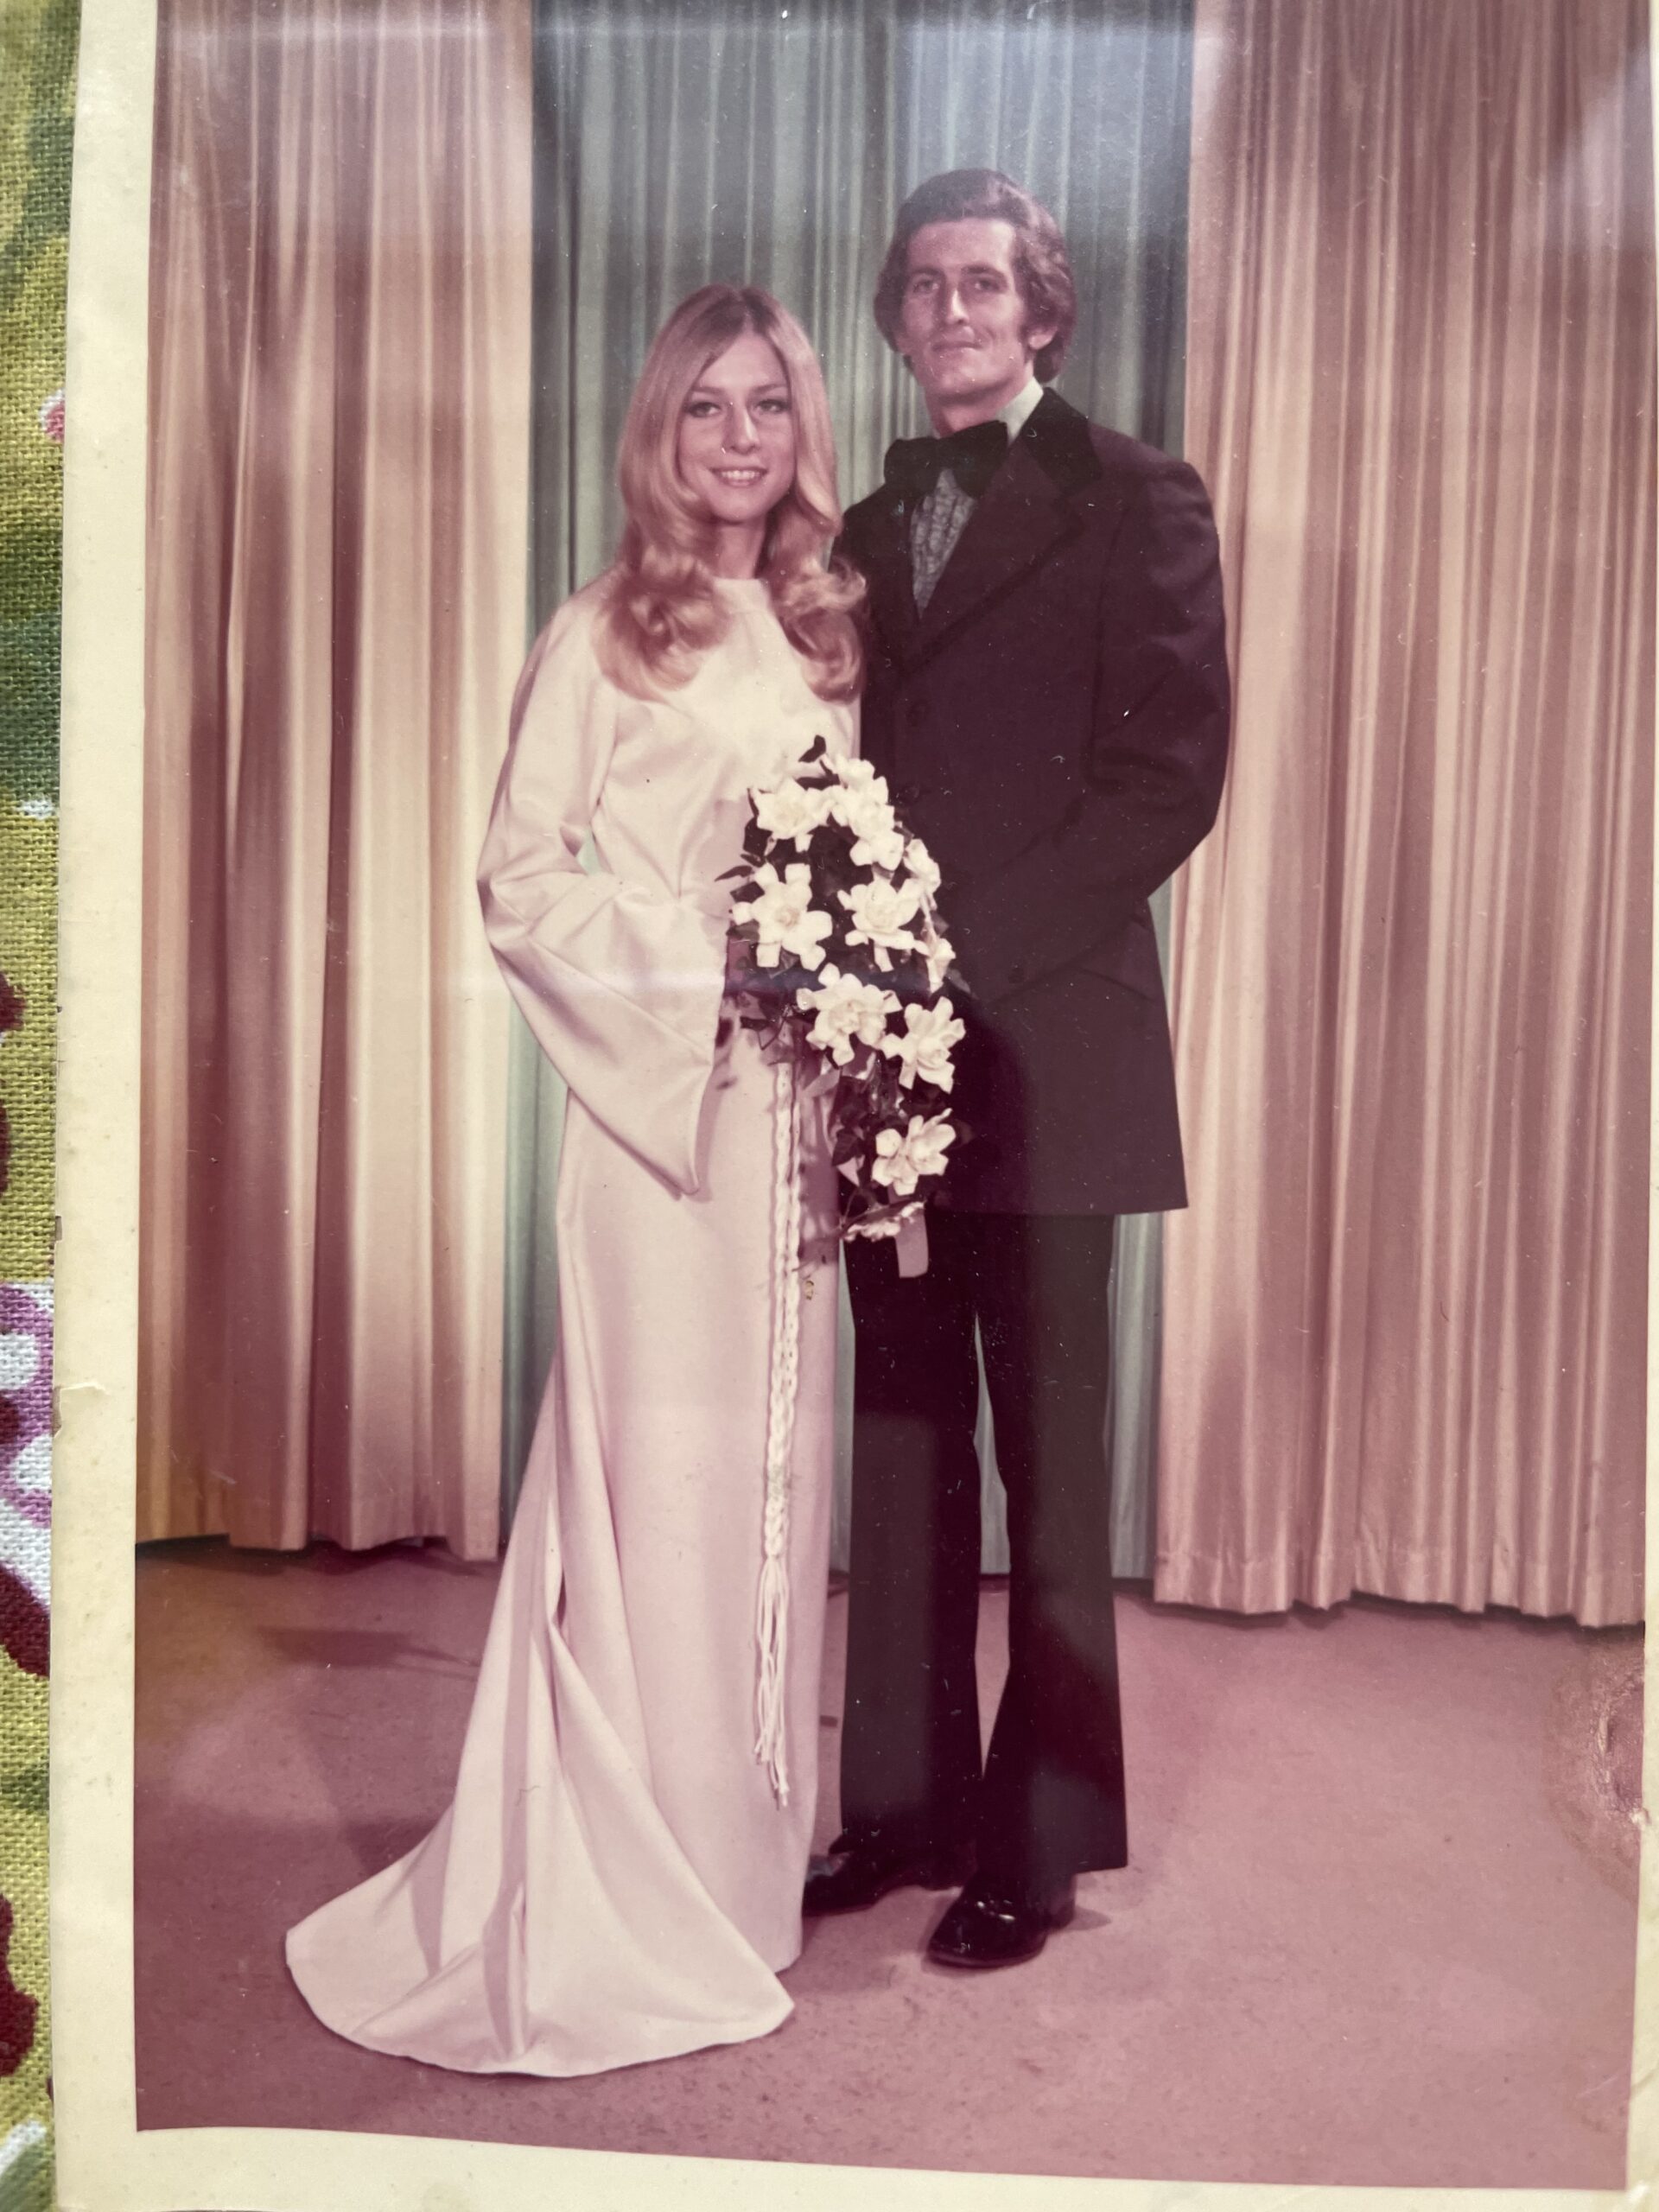 Dan and Joy Flynn on their wedding day in November of 1971. They have the same birthday, February 13, one day before Valentine's Day, and say that every day is like Valentine's Day for them, after more than 50 years of marriage.